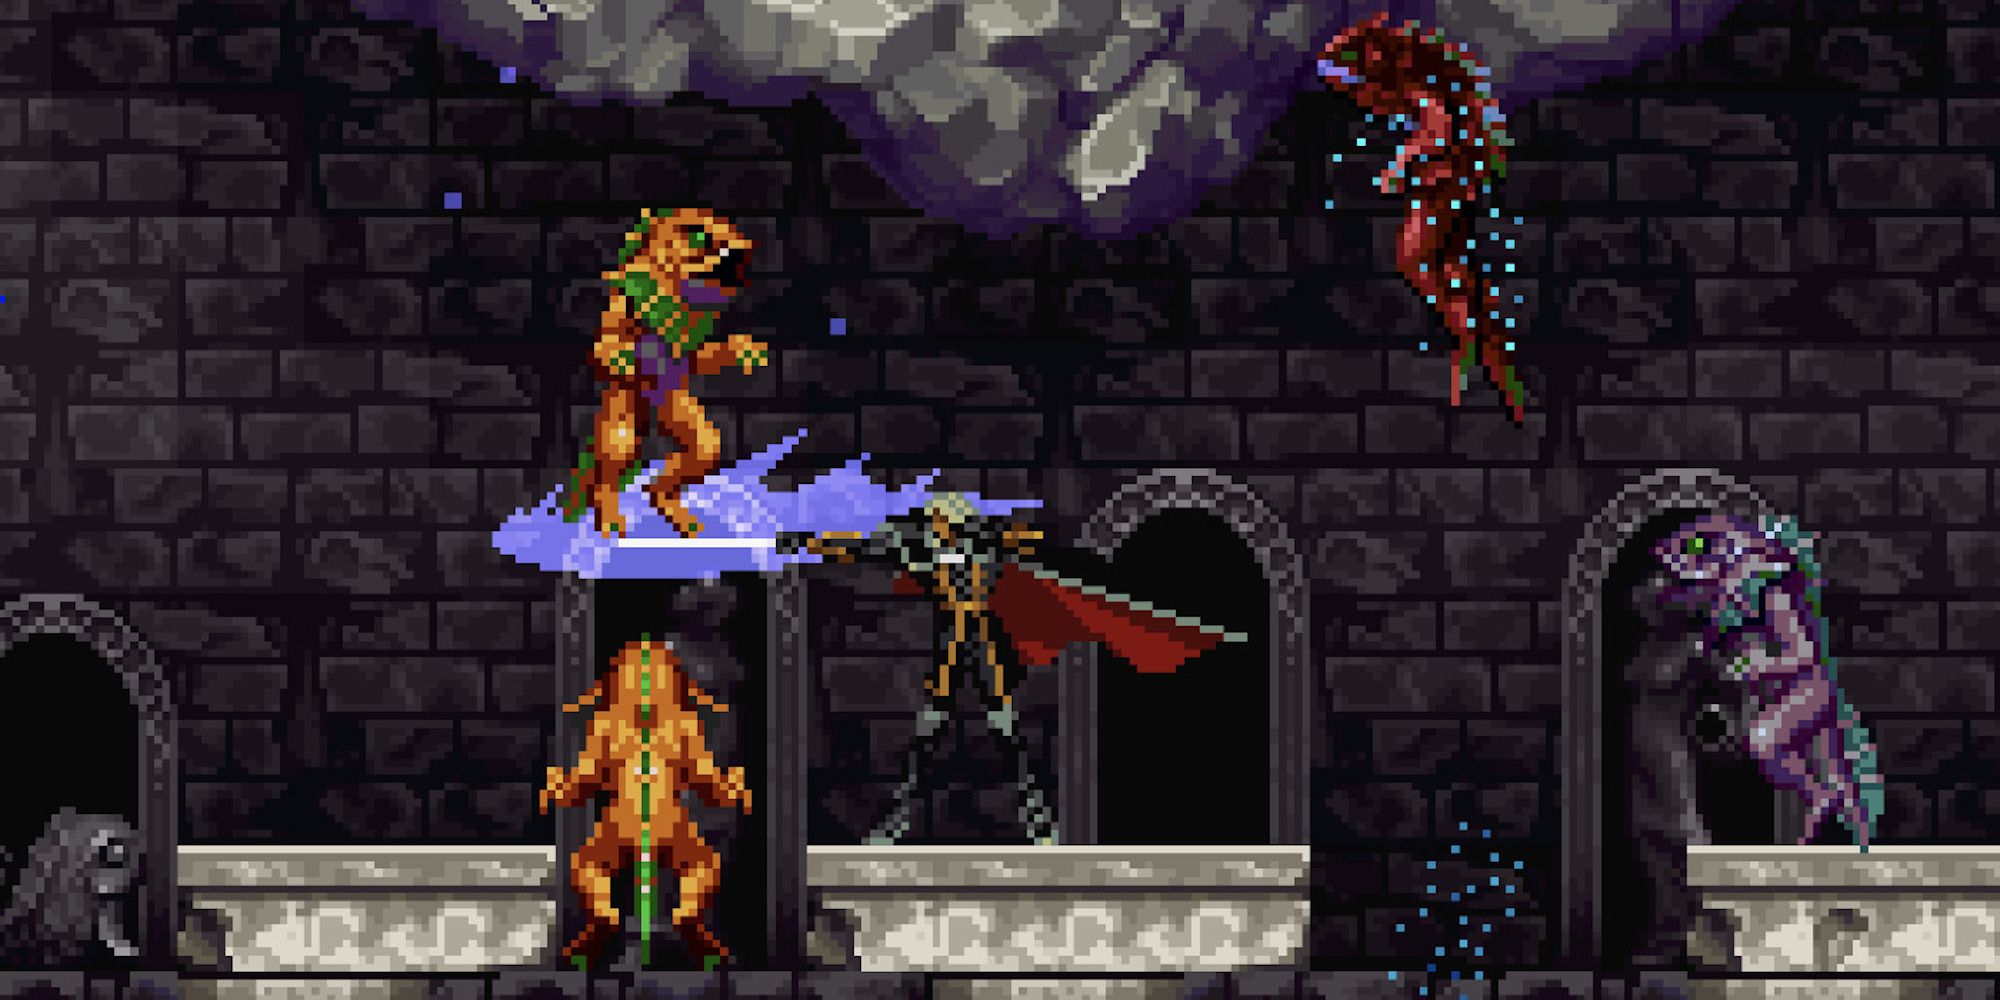 fighting enemies in Castlevania: Symphony Of The Night